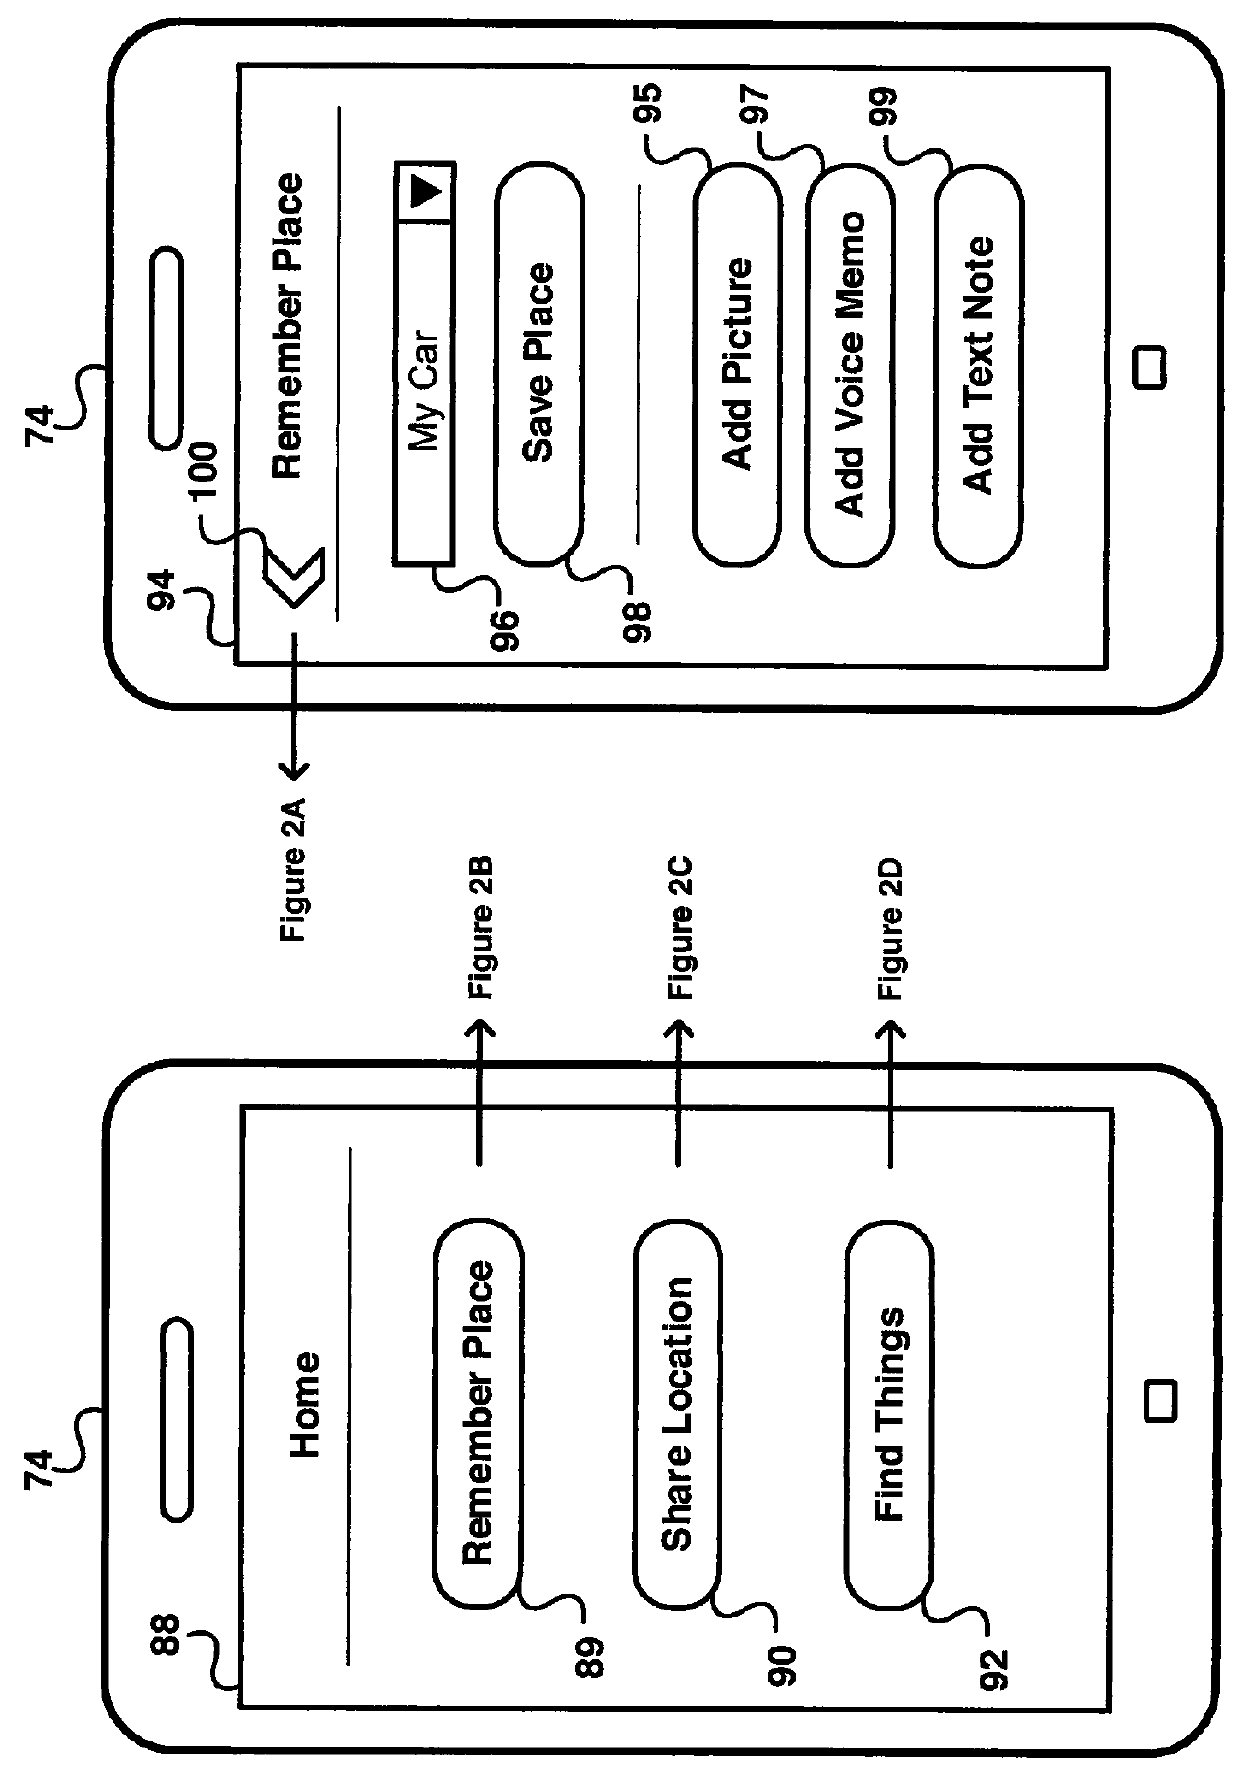 Methods and systems for locating persons and places with mobile devices